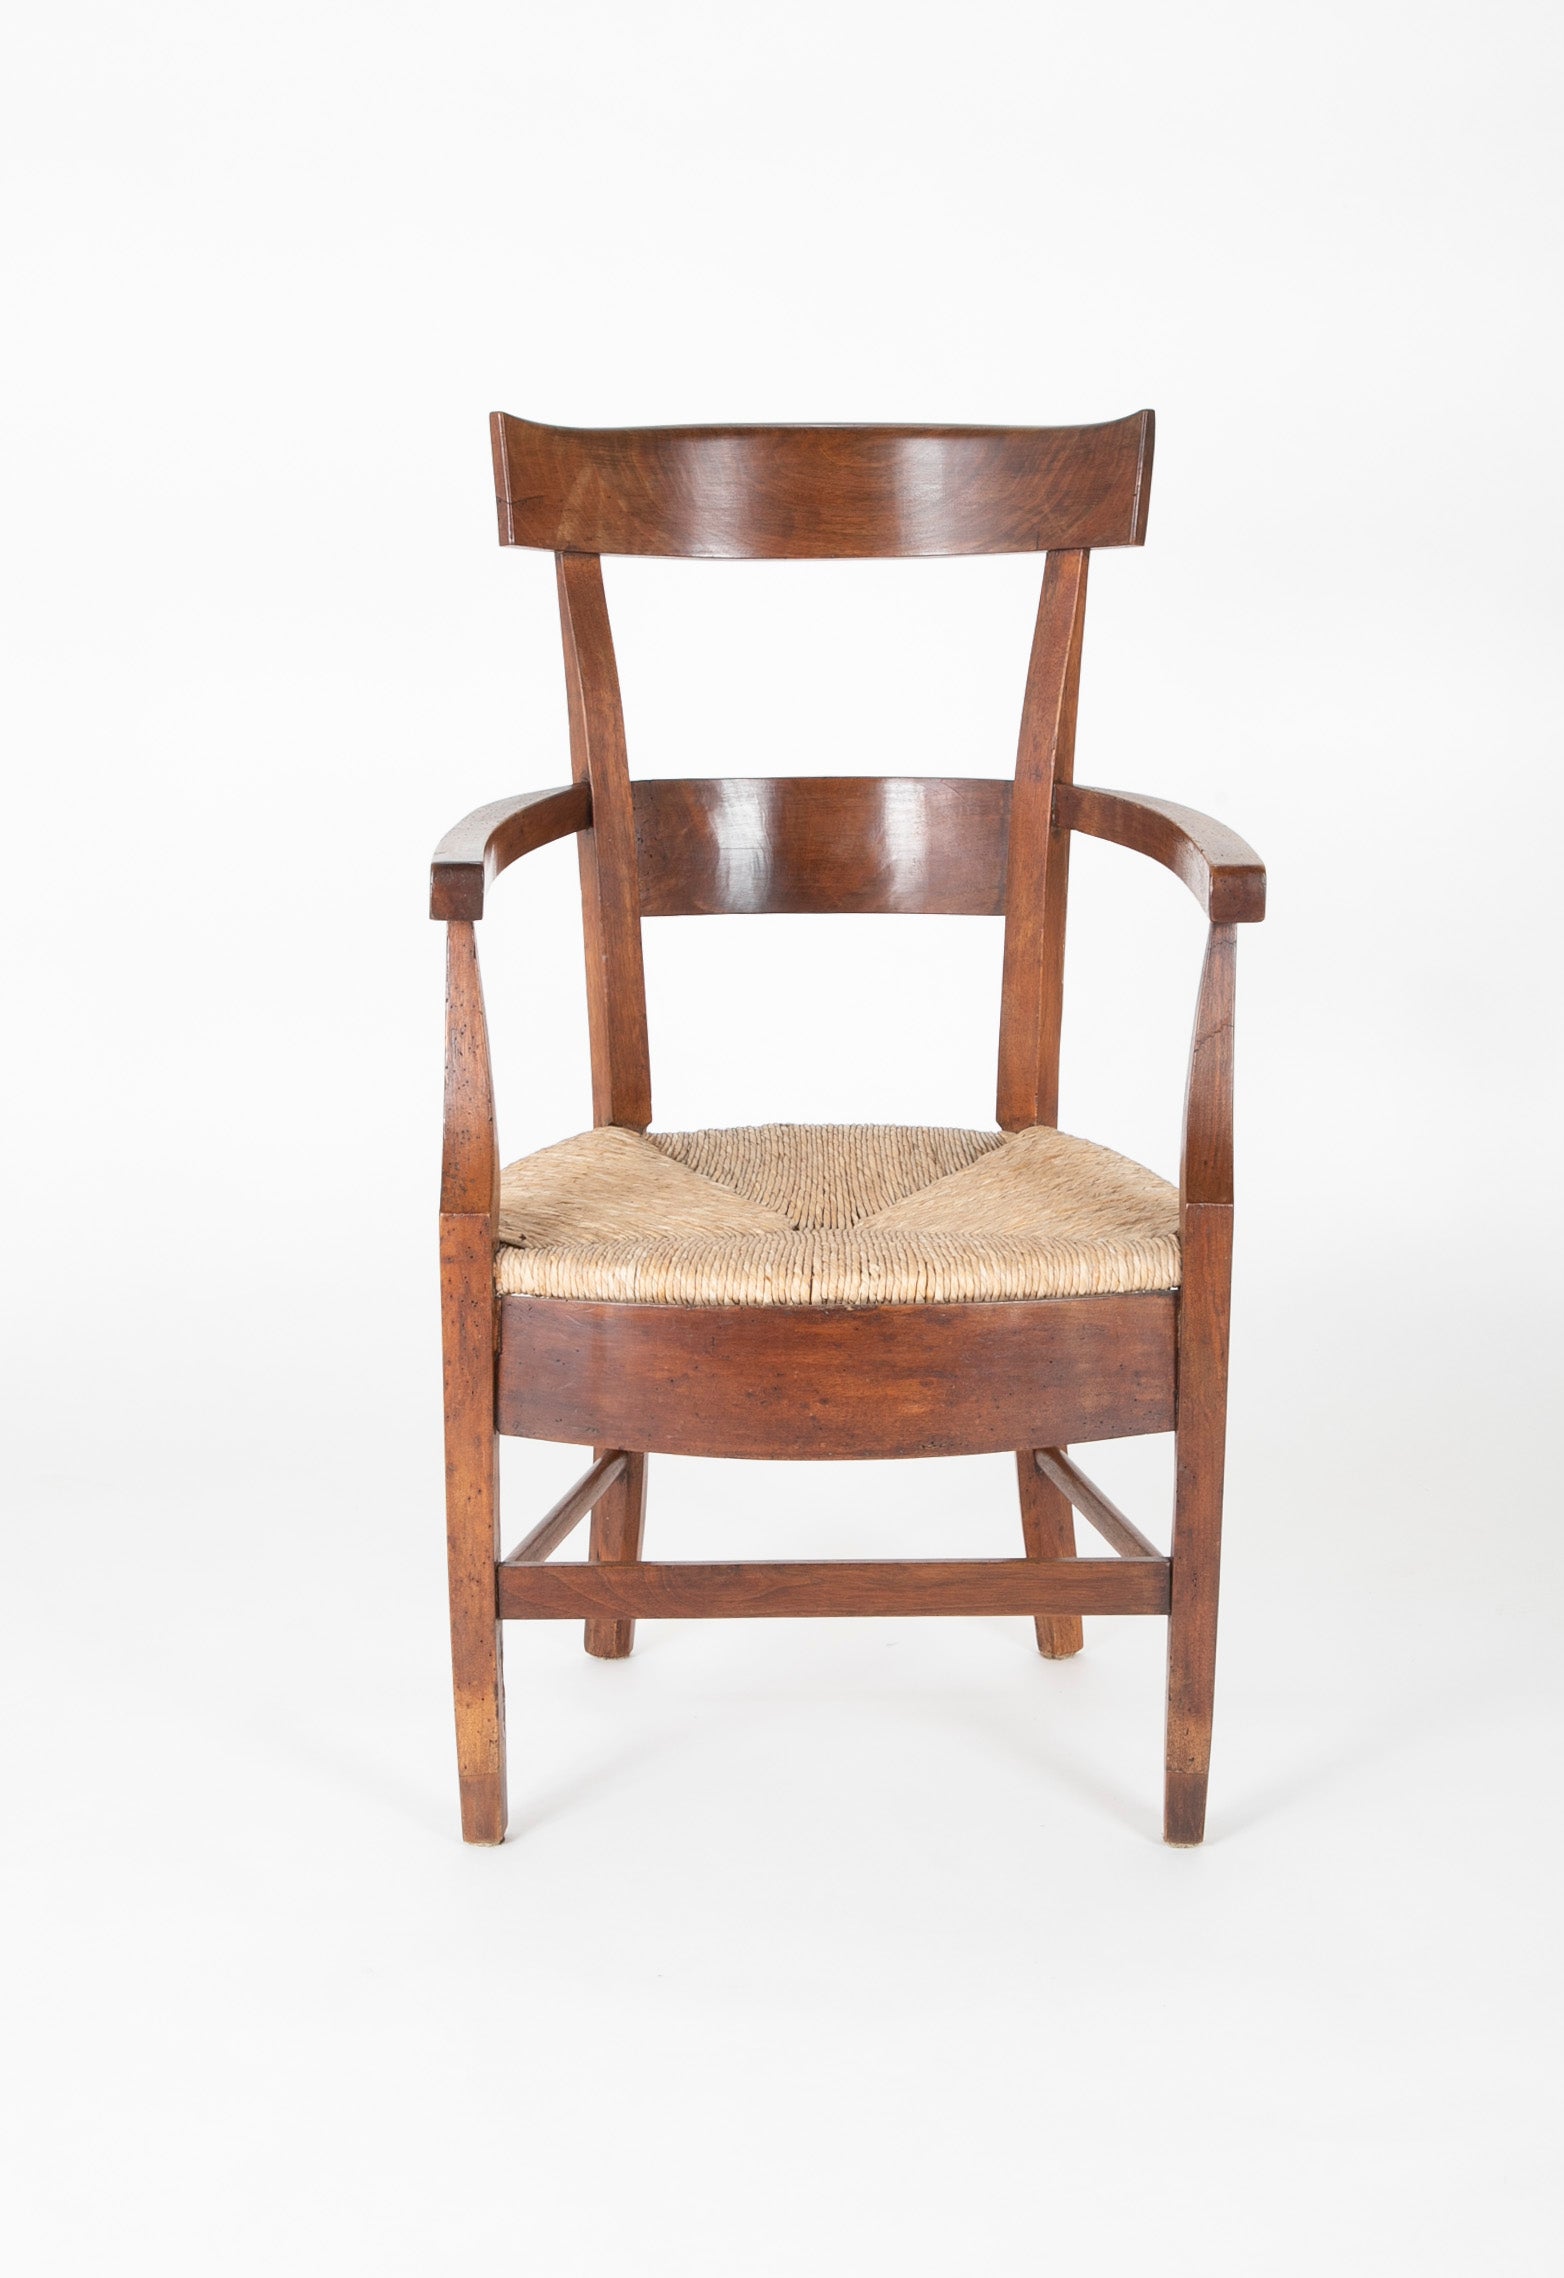 French Empire Style Ladderback Chair